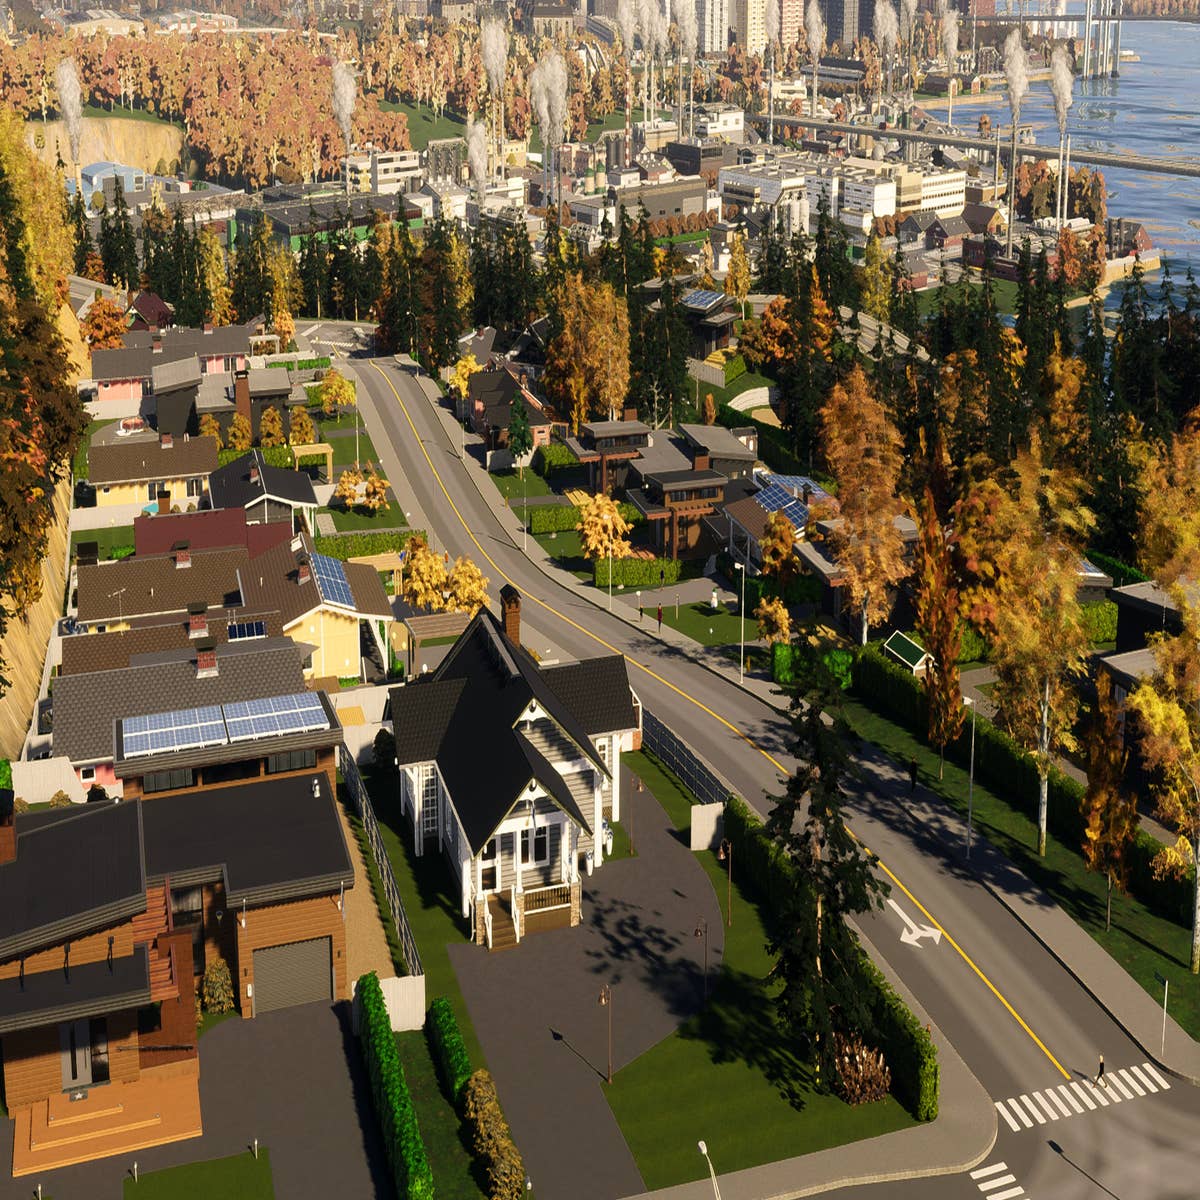 Cities: Skylines 2 performance has not achieved the benchmark we